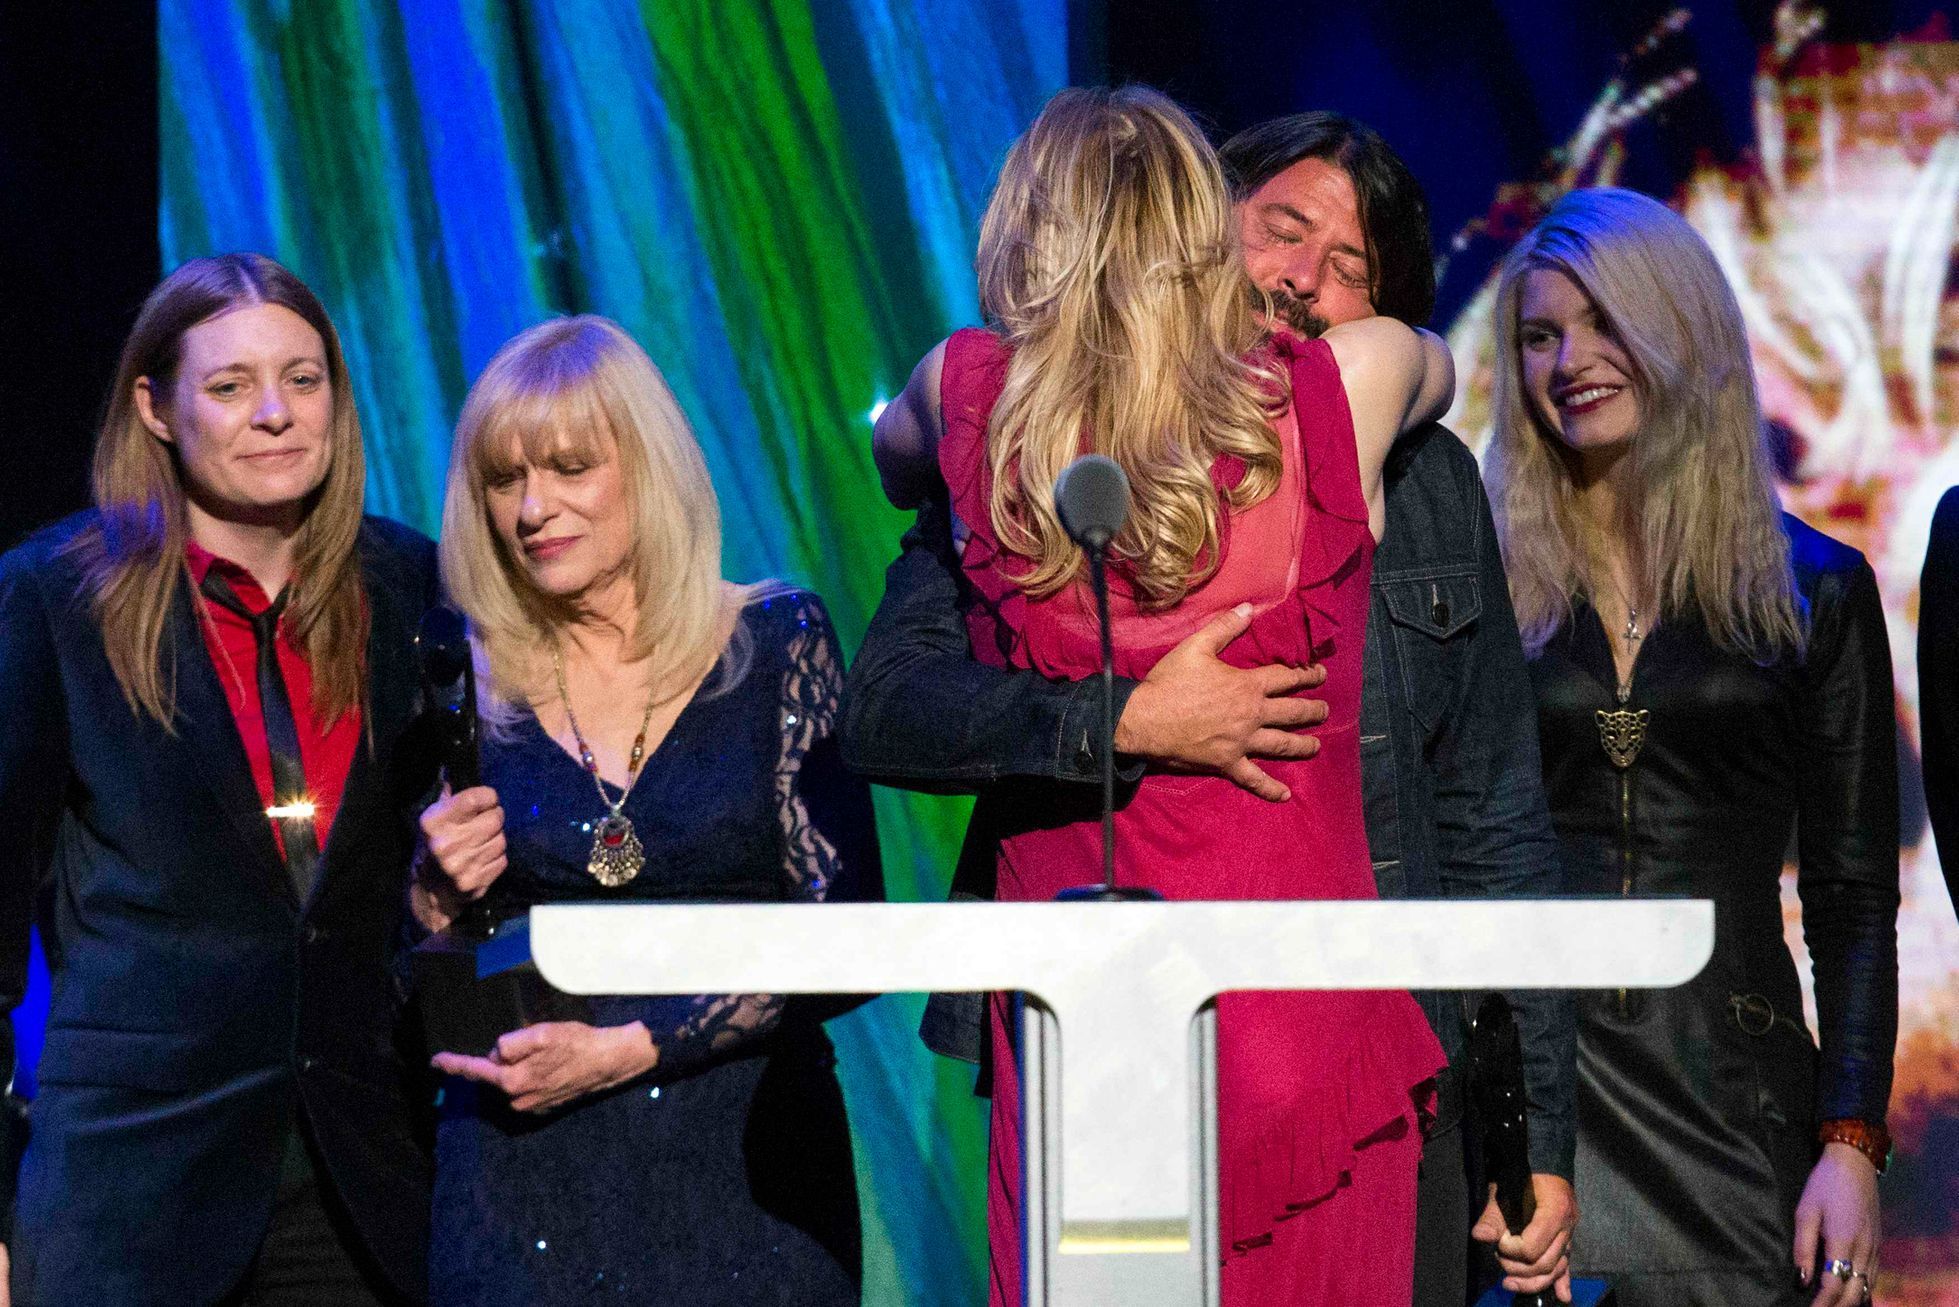 Love hugs drummer Grohl of Nirvana after the band was inducted during 29th annual Rock and Roll Hall of Fame Induction Ceremony in Brooklyn, New York